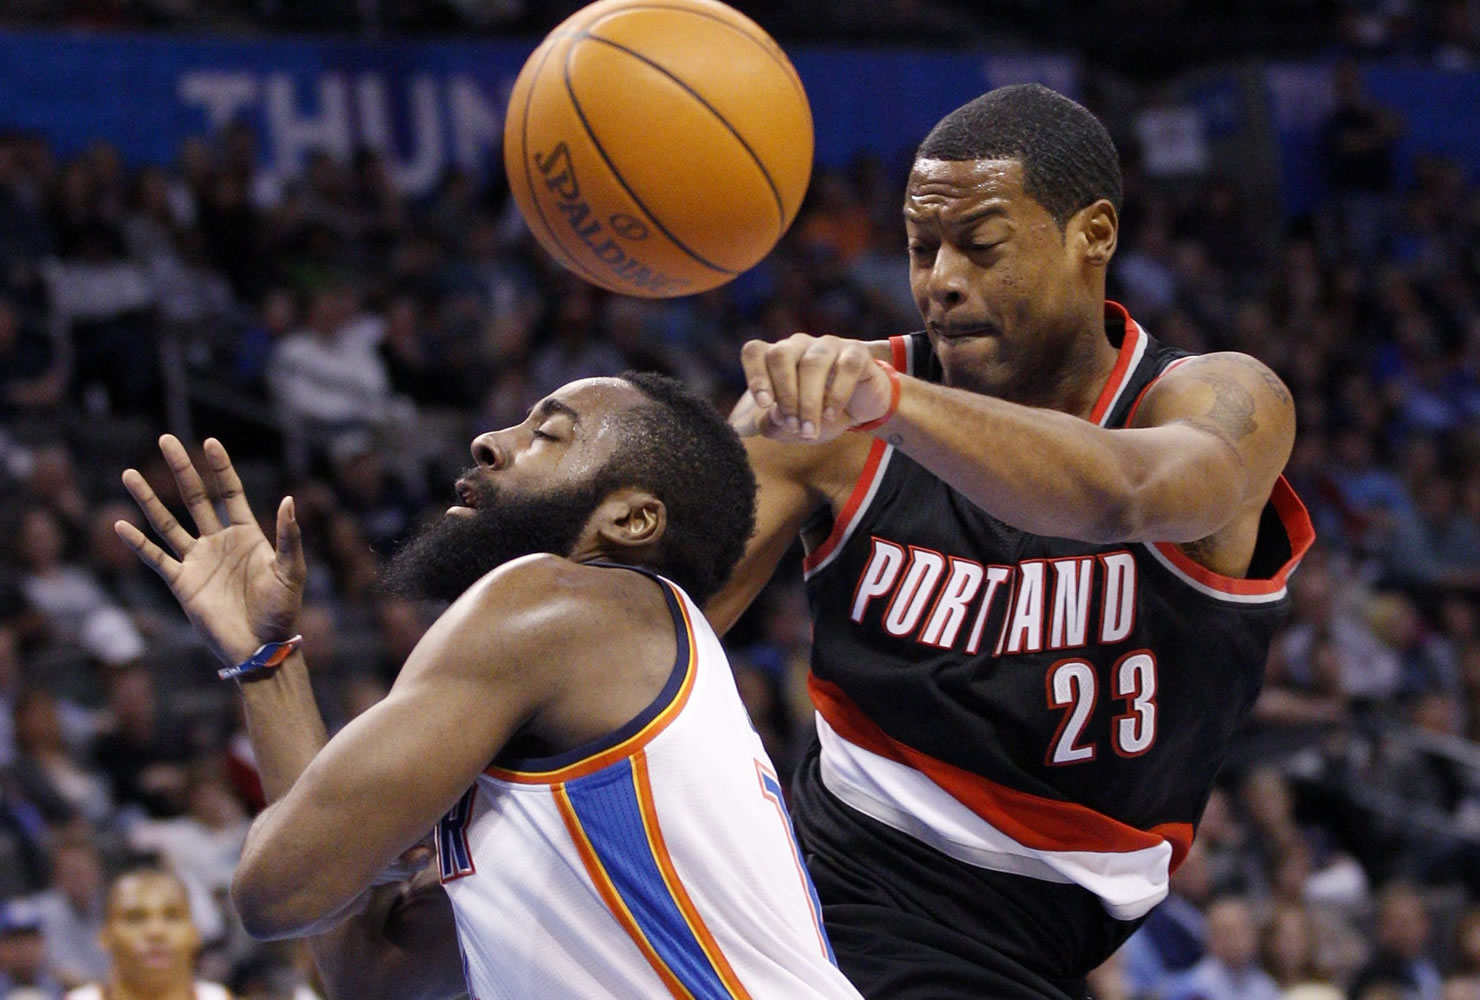 James Harden, left, loses the ball as he drives to the basket in front of Portland's Marcus Camby (23) in the Blazers' 103-93 win.